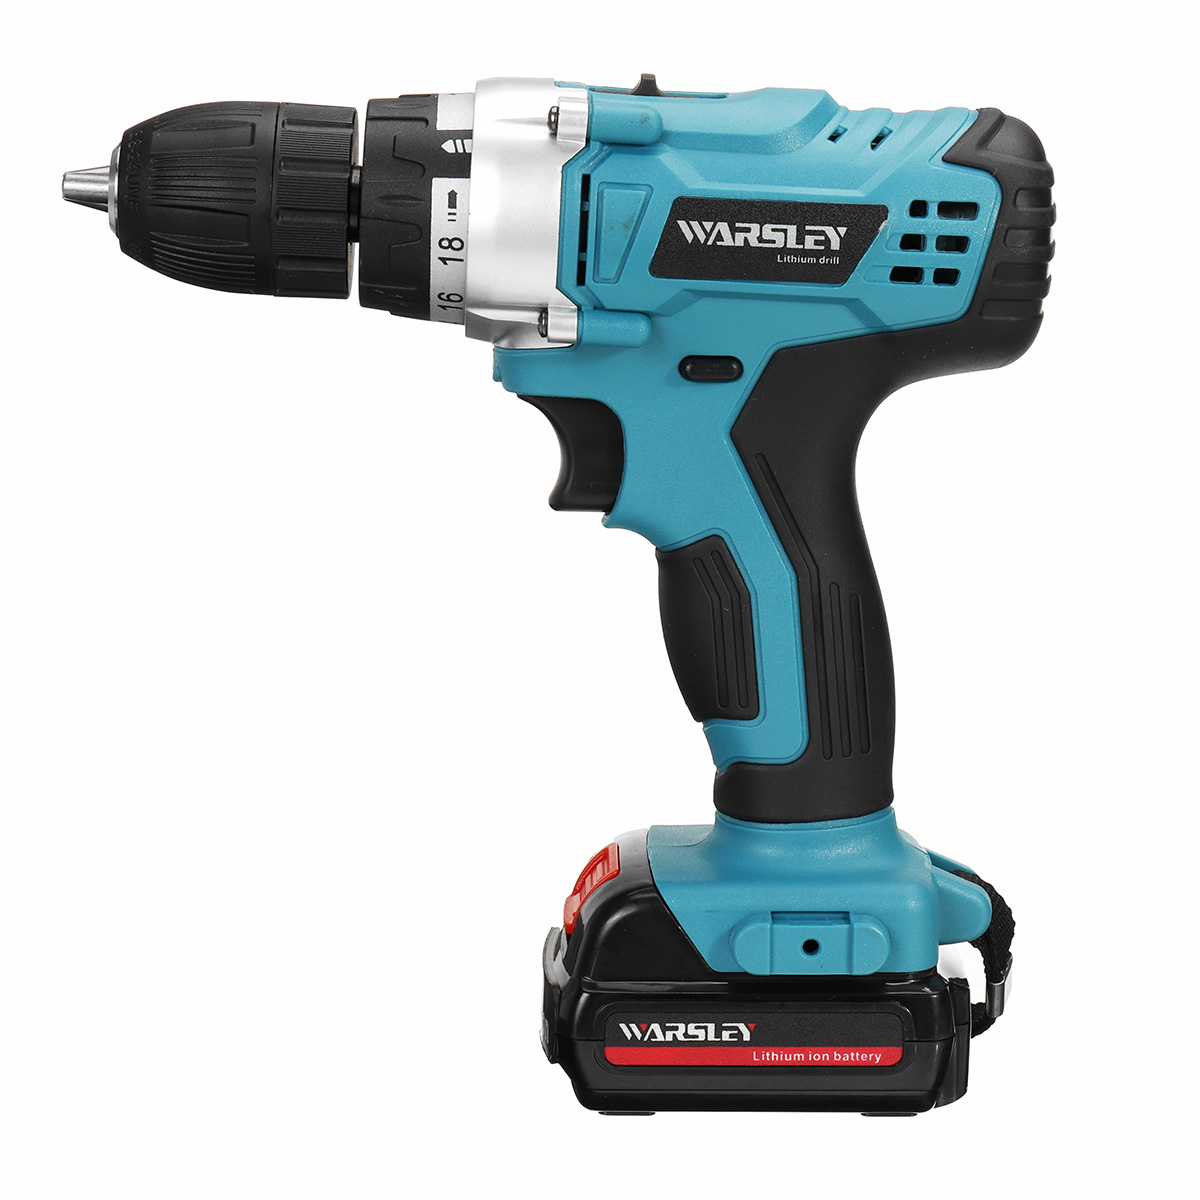 12V Cordless Drill 1500mAh Electric Driller 18+1 Mode Power Drills 1 Lithium Battery With Bits